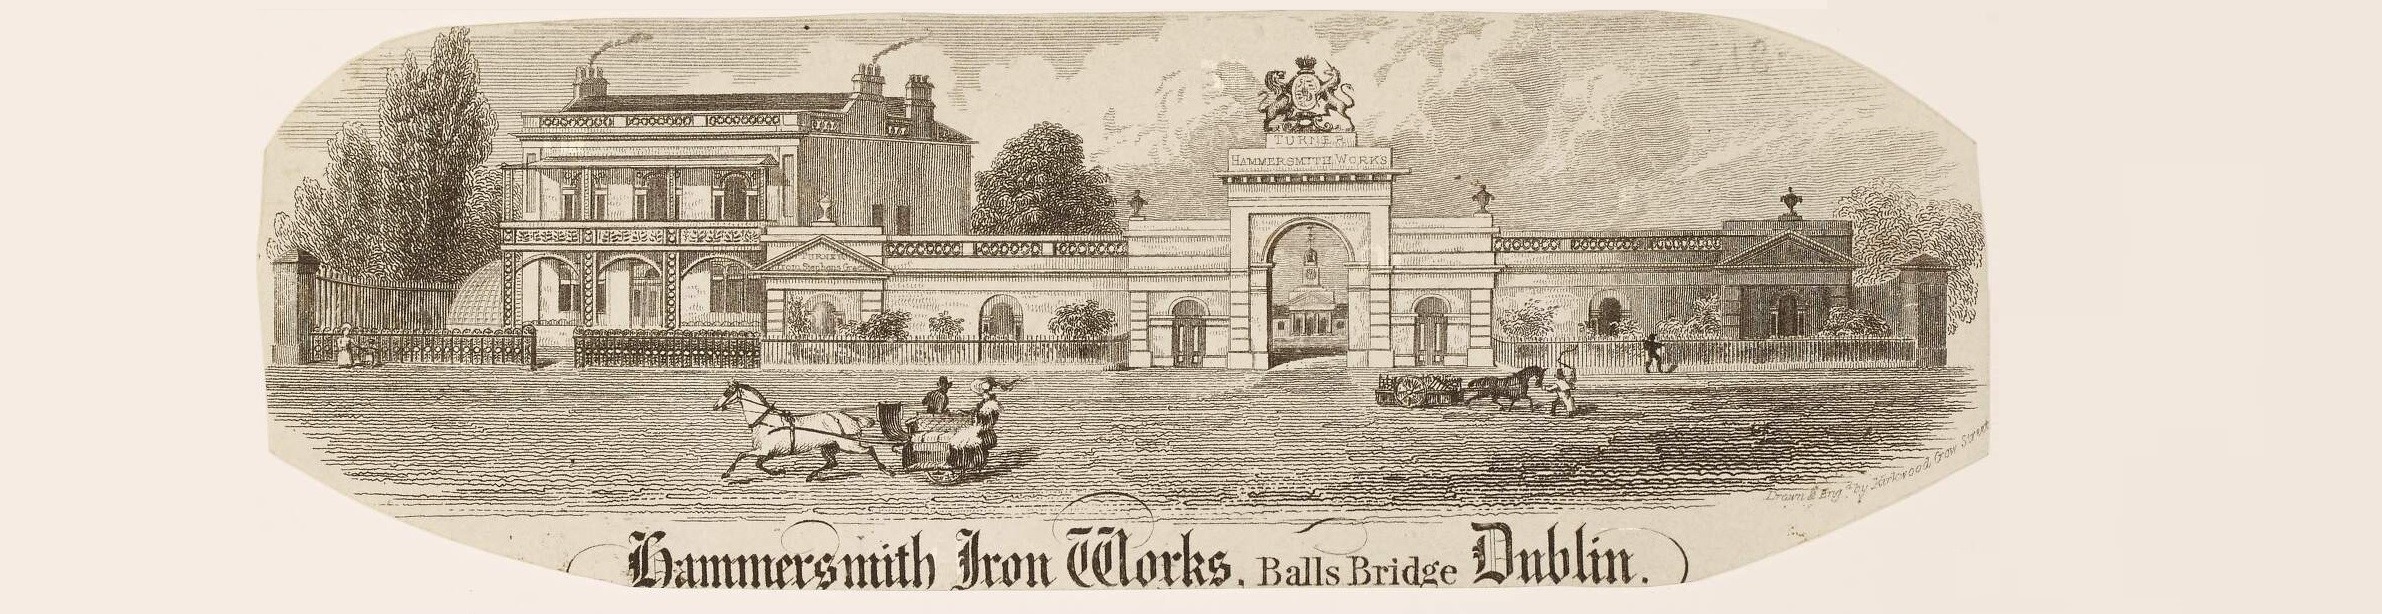 An engraving of Hammersmith iron works.